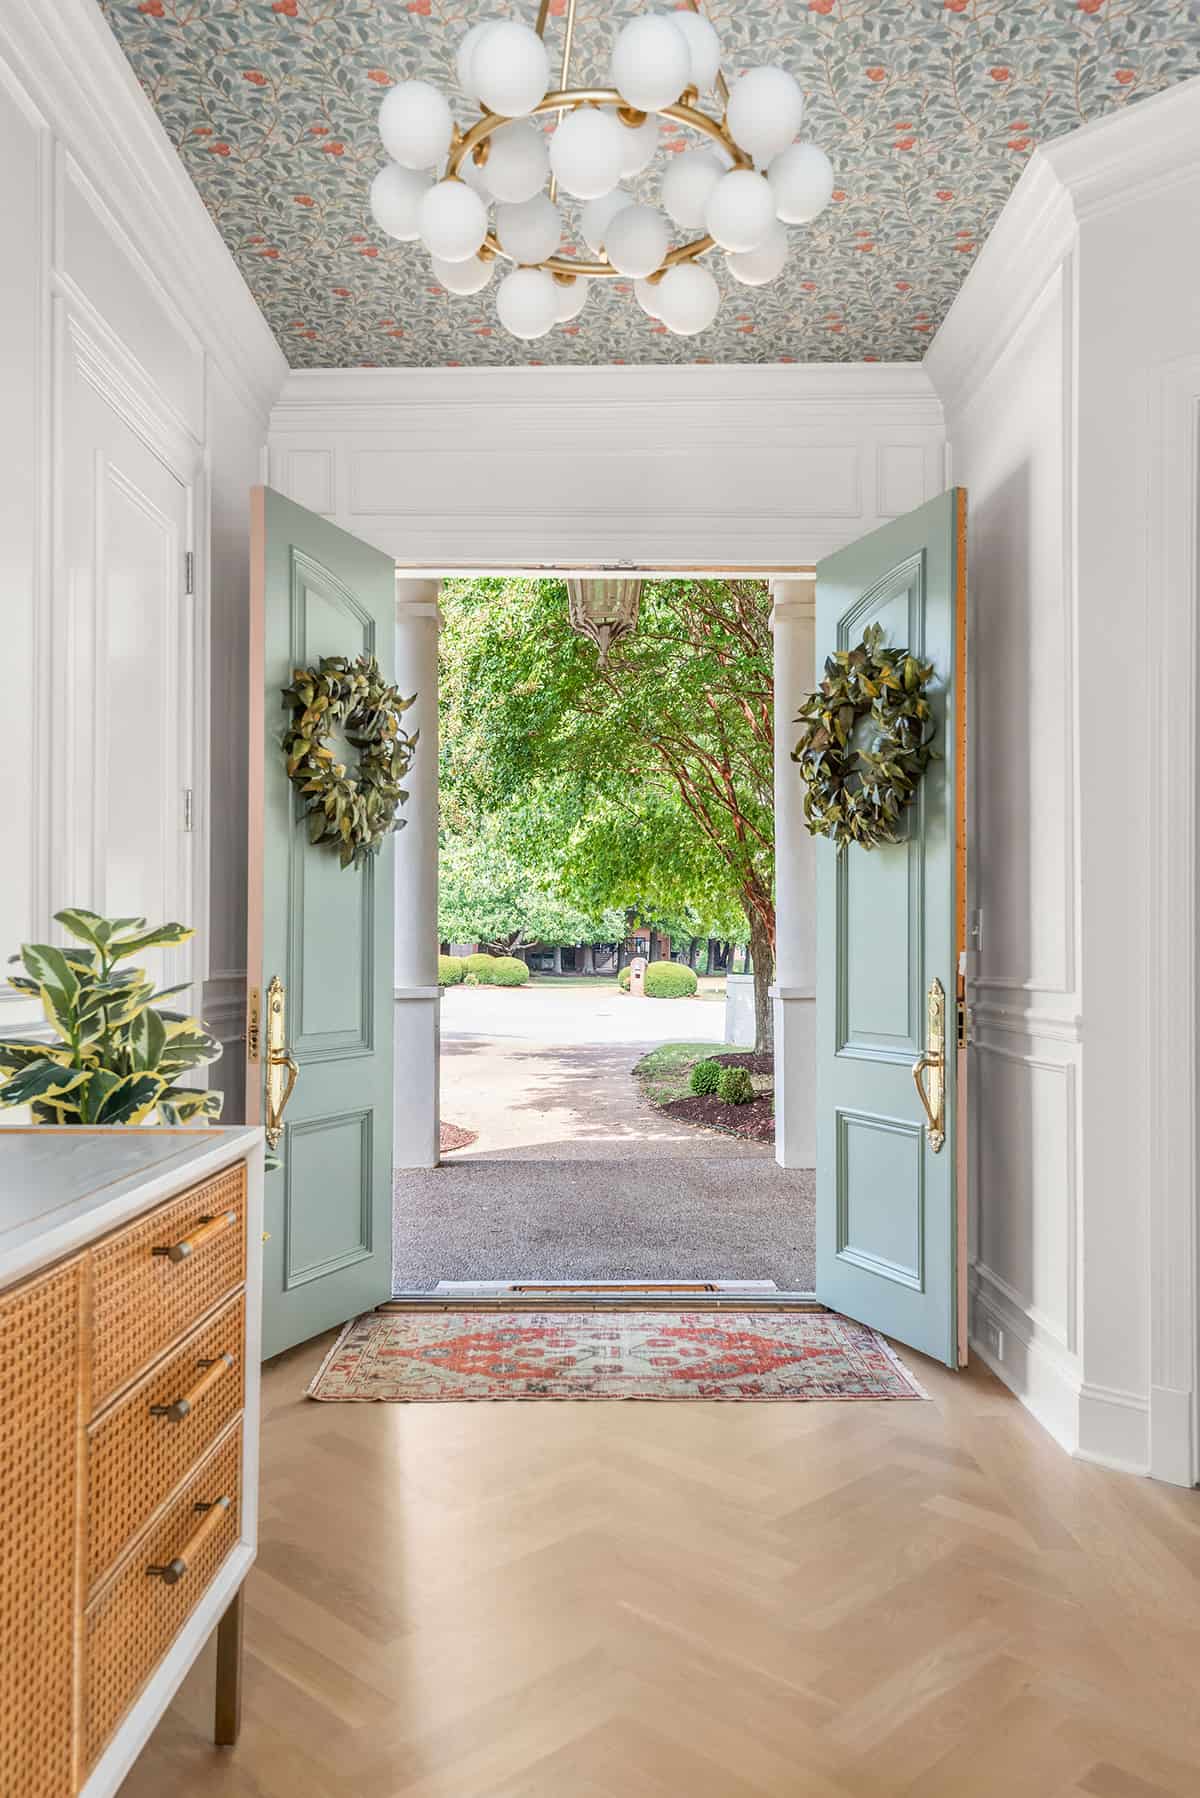 Entryway Decor and Wallpapered Ceiling - A Beautiful Mess